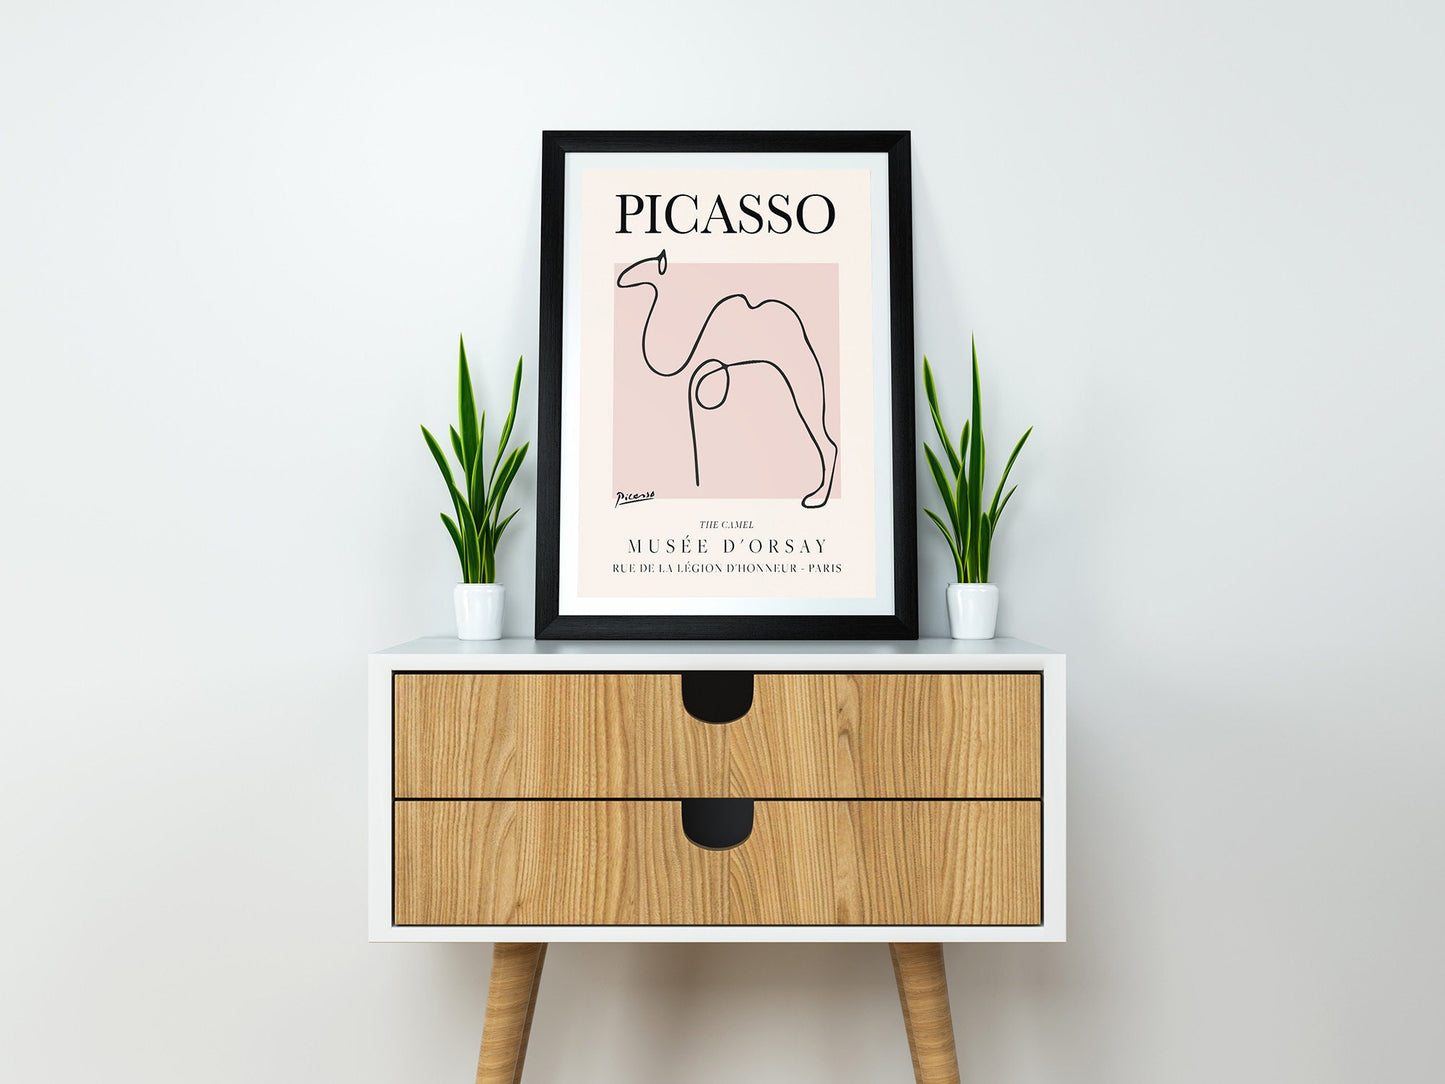 Picasso - Camel, Exhibition Vintage Line Art Poster, Minimalist Line Drawing, Ideal Home Decor or Gift Print